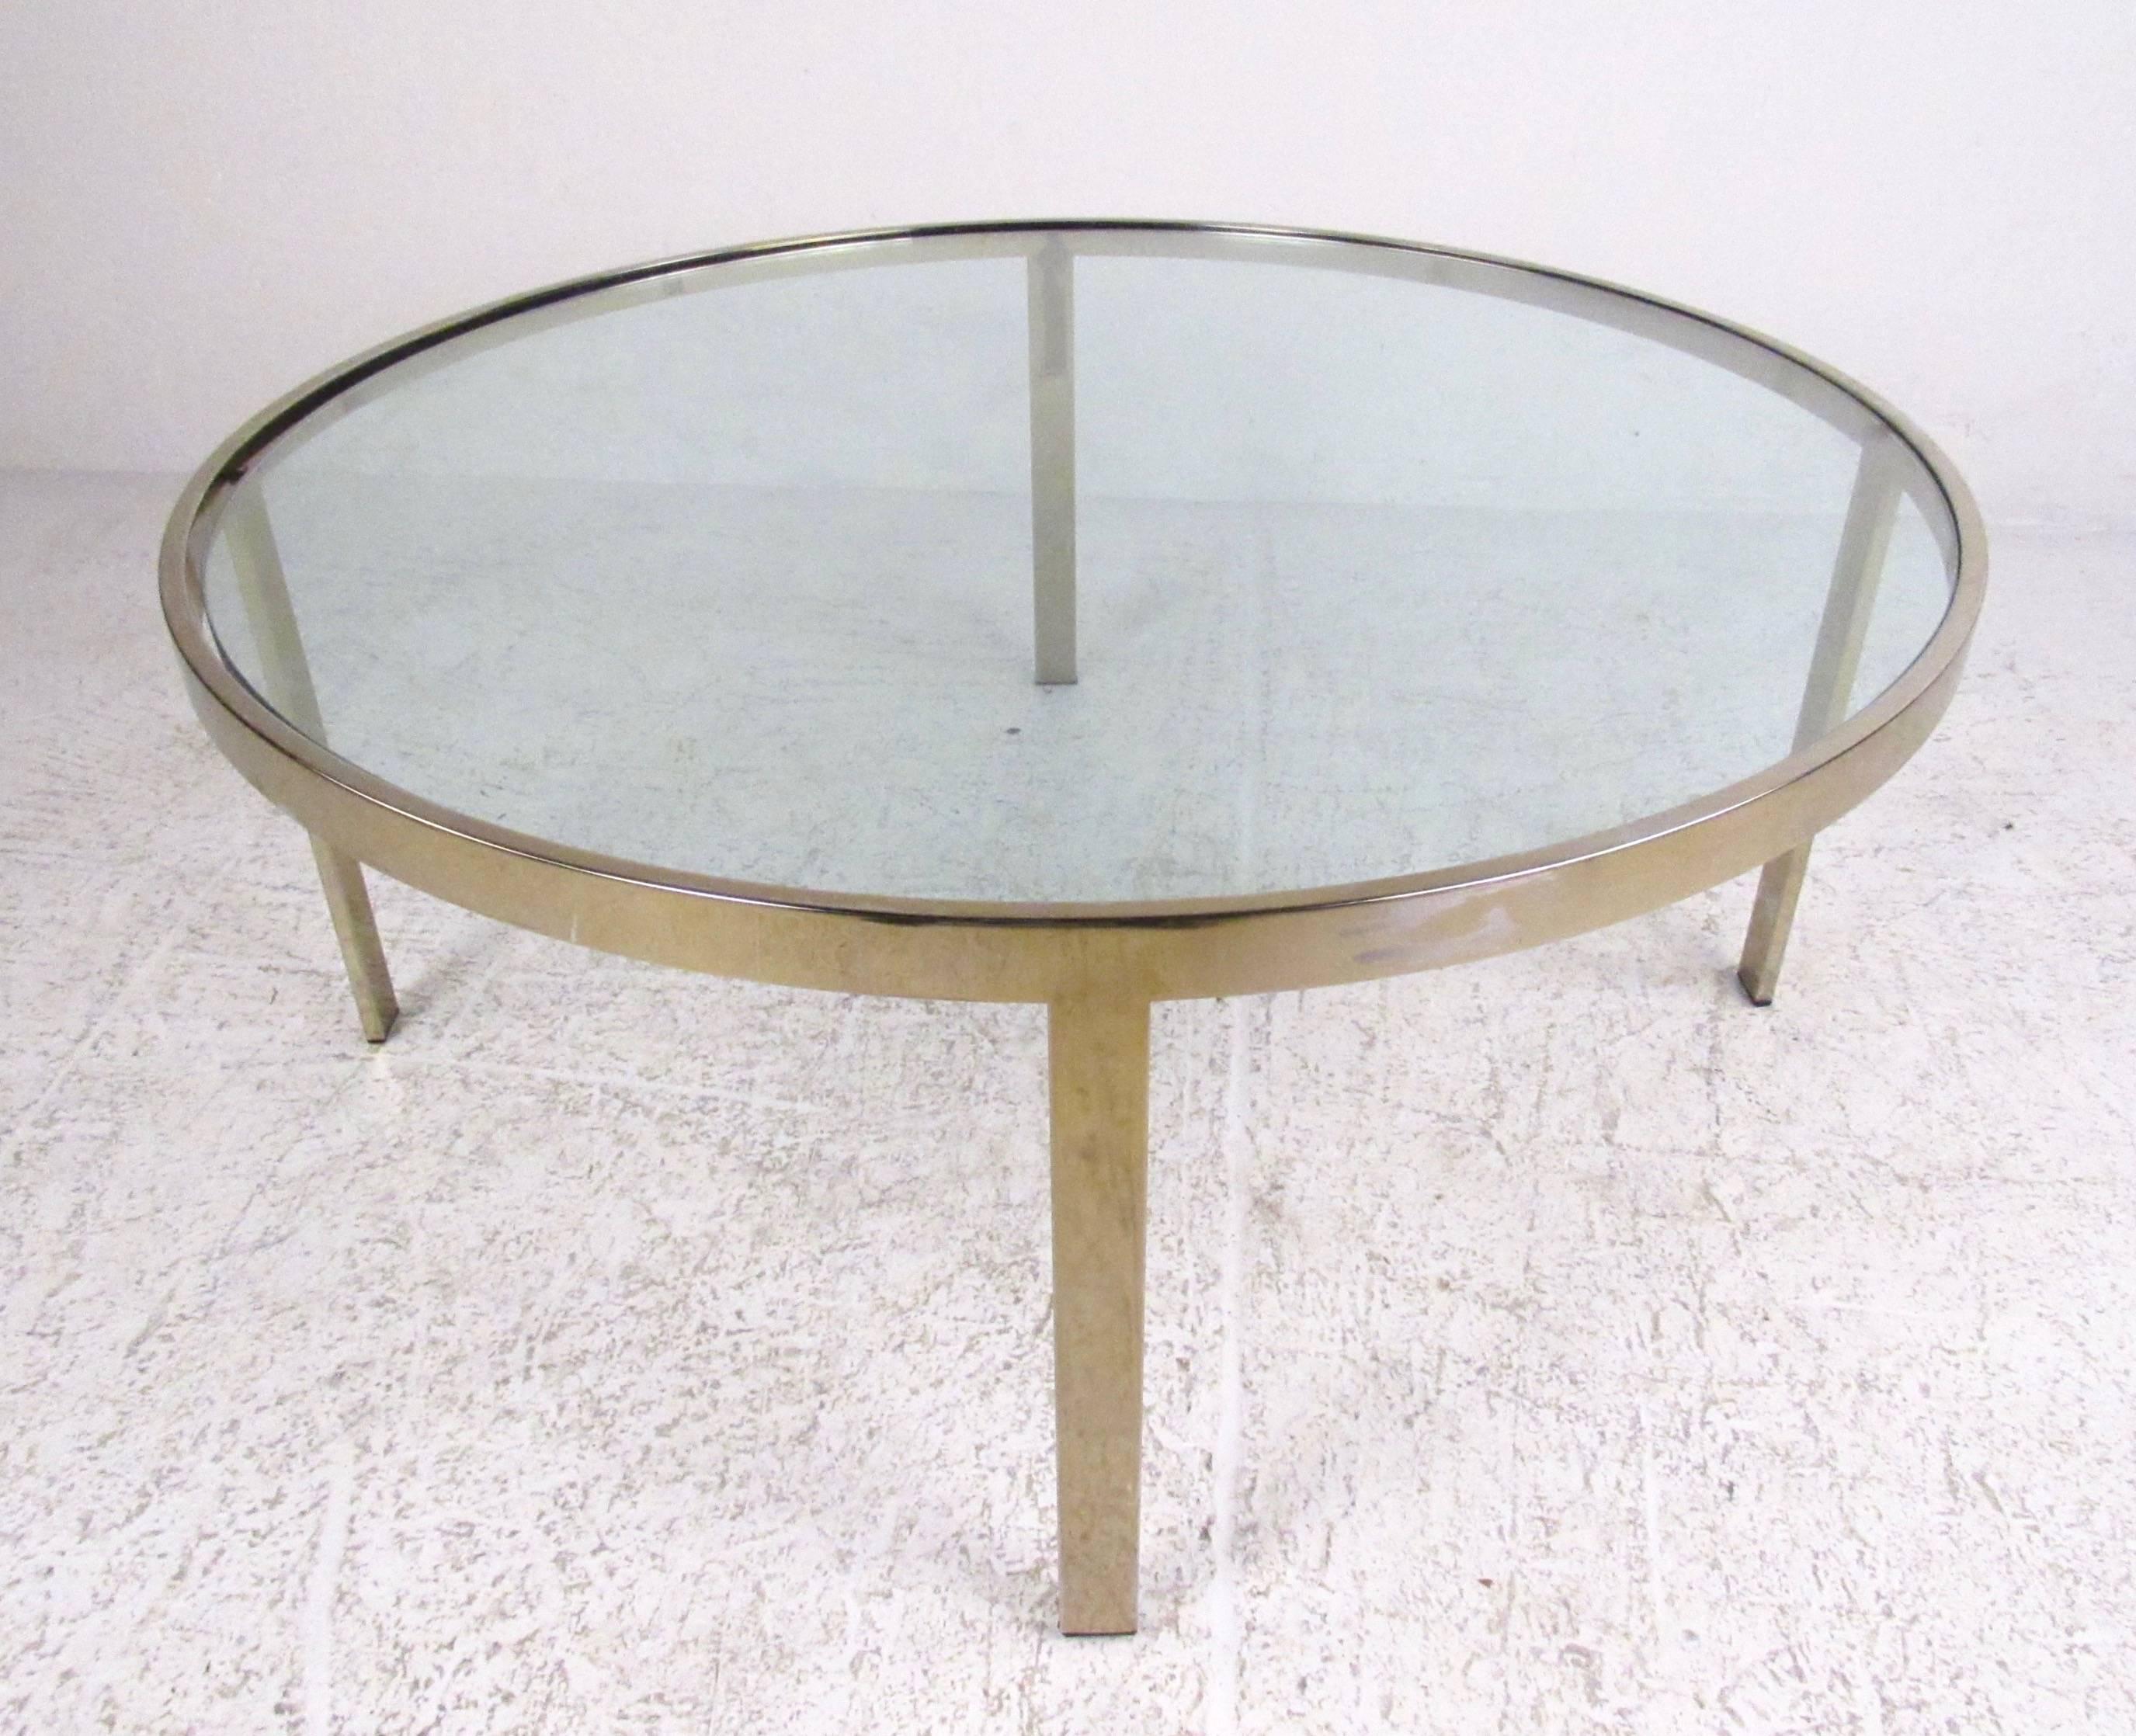 This unique circular coffee table features brass-plated chrome finish with heavy Mid-Century construction, and an inlaid glass top. Elegant modern design makes this a stylish addition to any interior. Please confirm item location (NY or NJ).